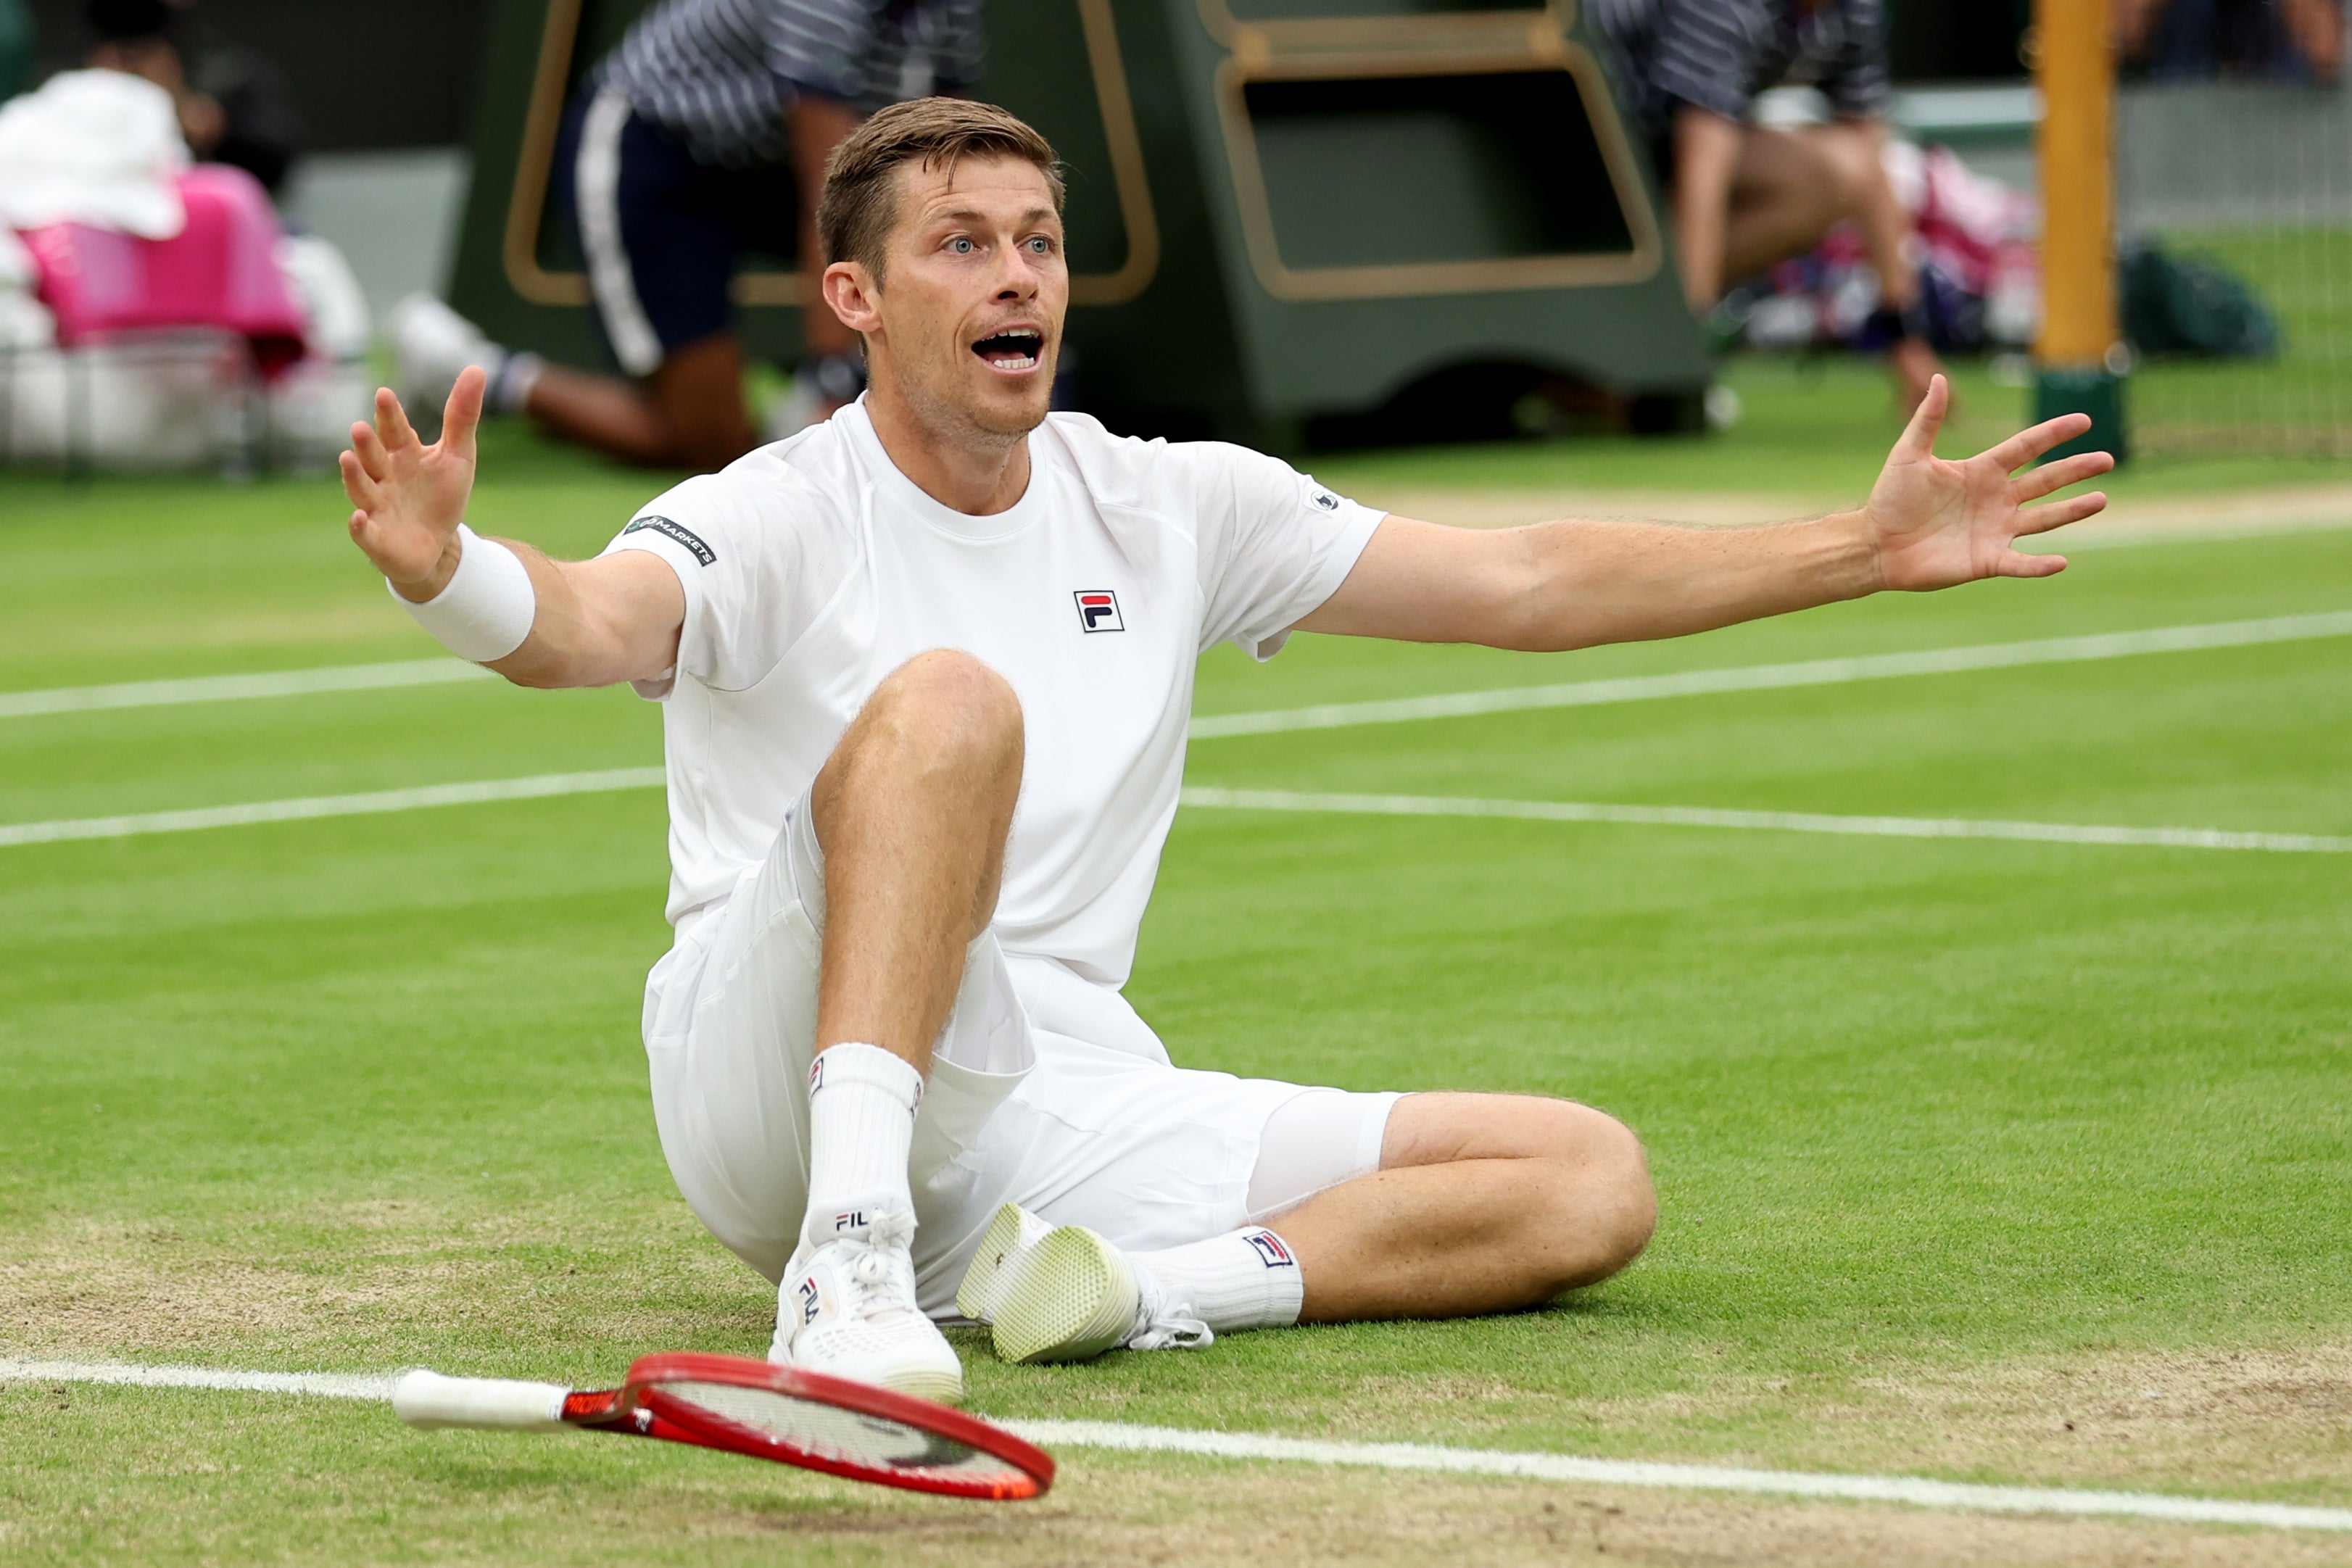 Skupski dropped to the floor after victory was sealed